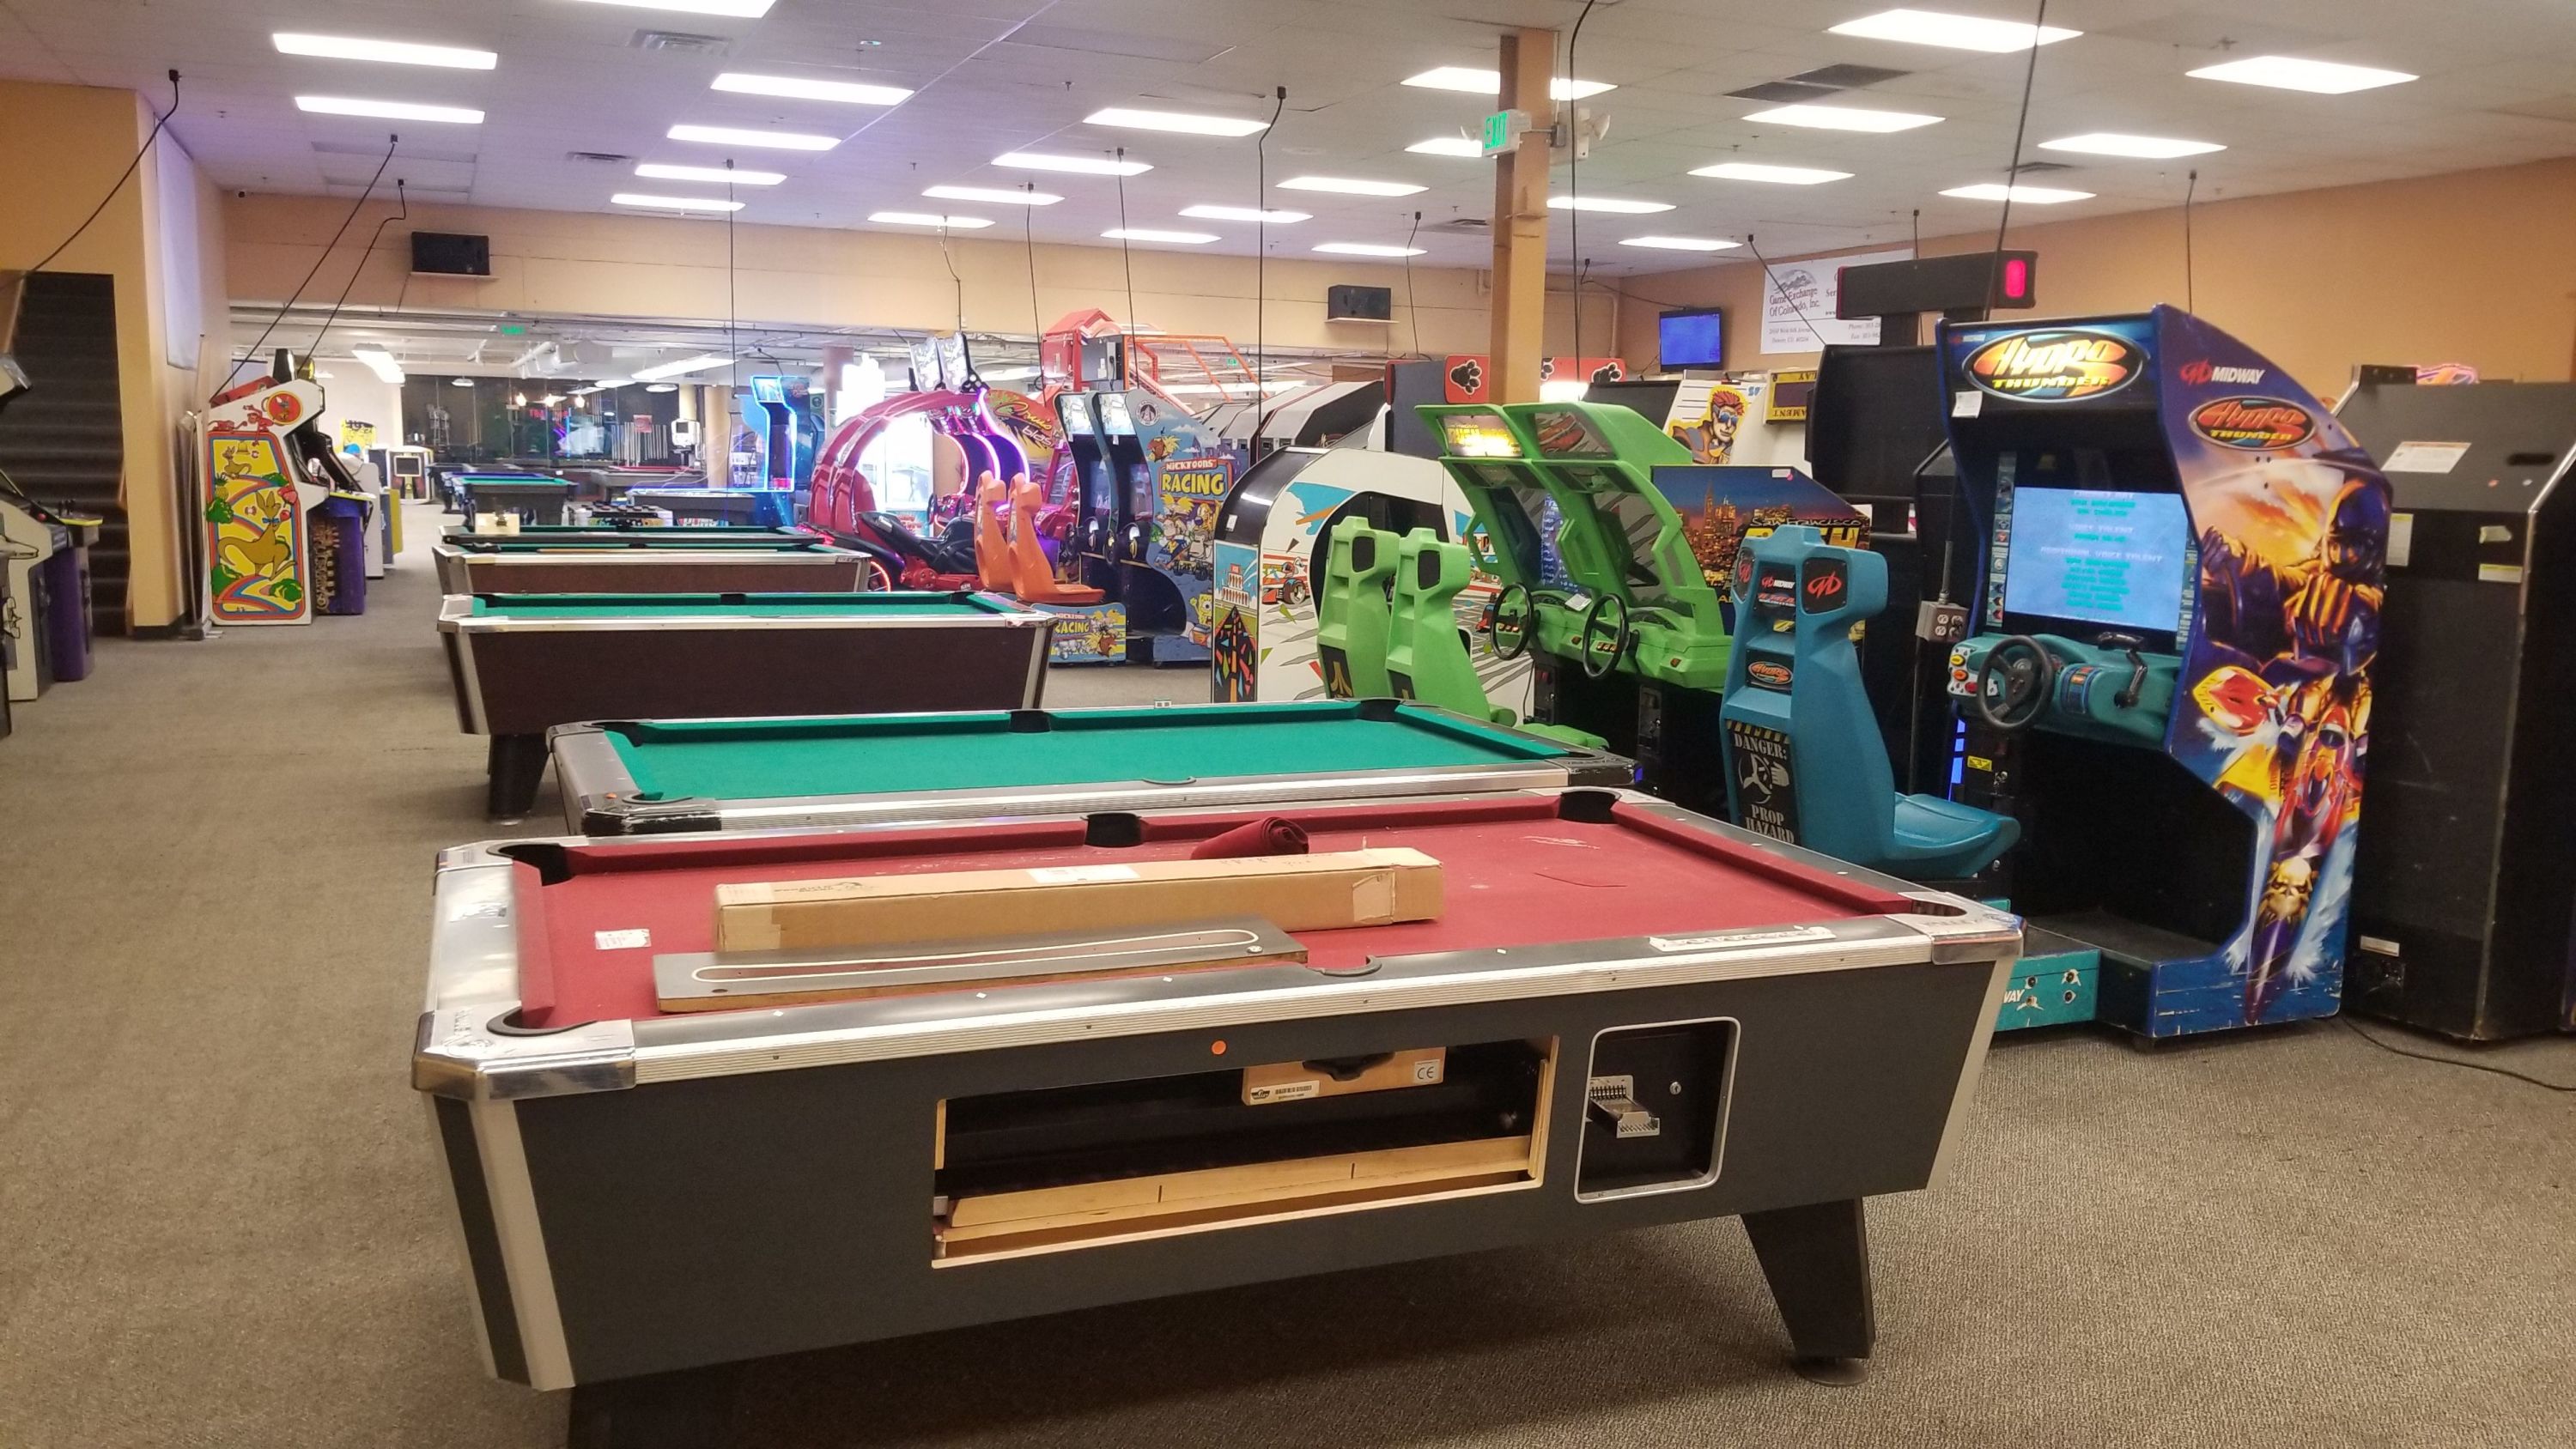 Pool Tables, Commercial Billiard Tables, & Arcade Games